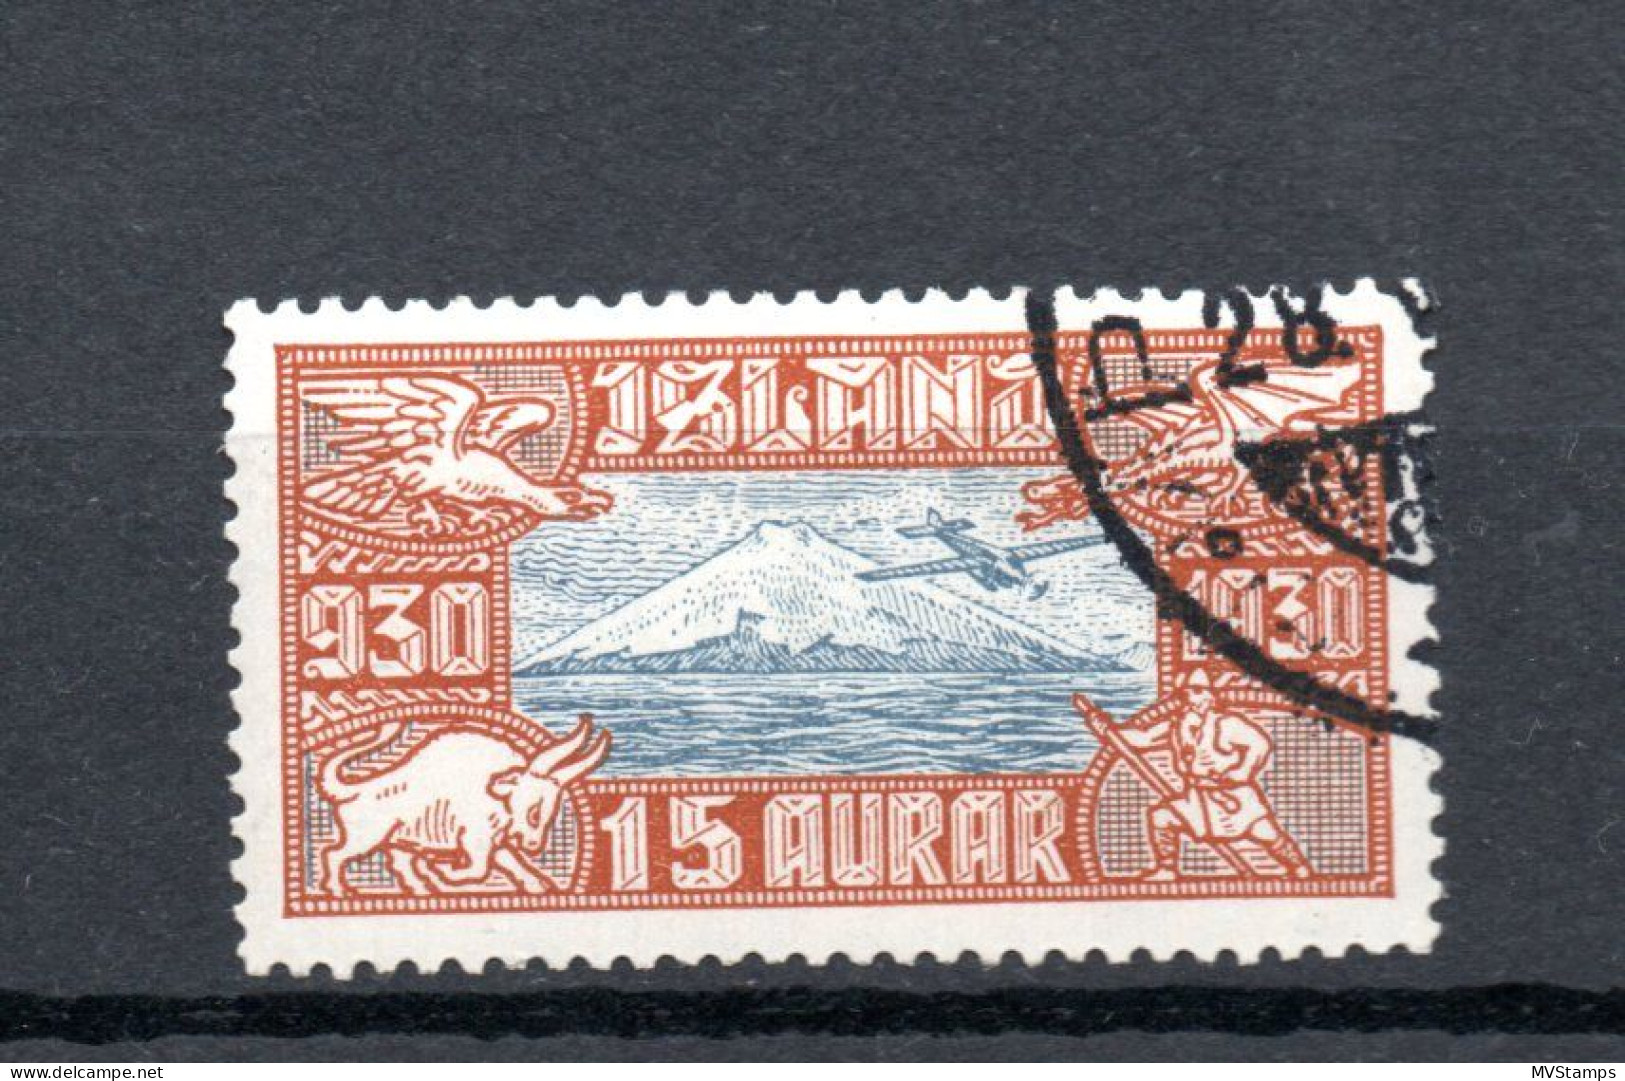 Iceland 1930 Old Airmail "Allthing" Stamp (Michel 142) Nice Used - Poste Aérienne